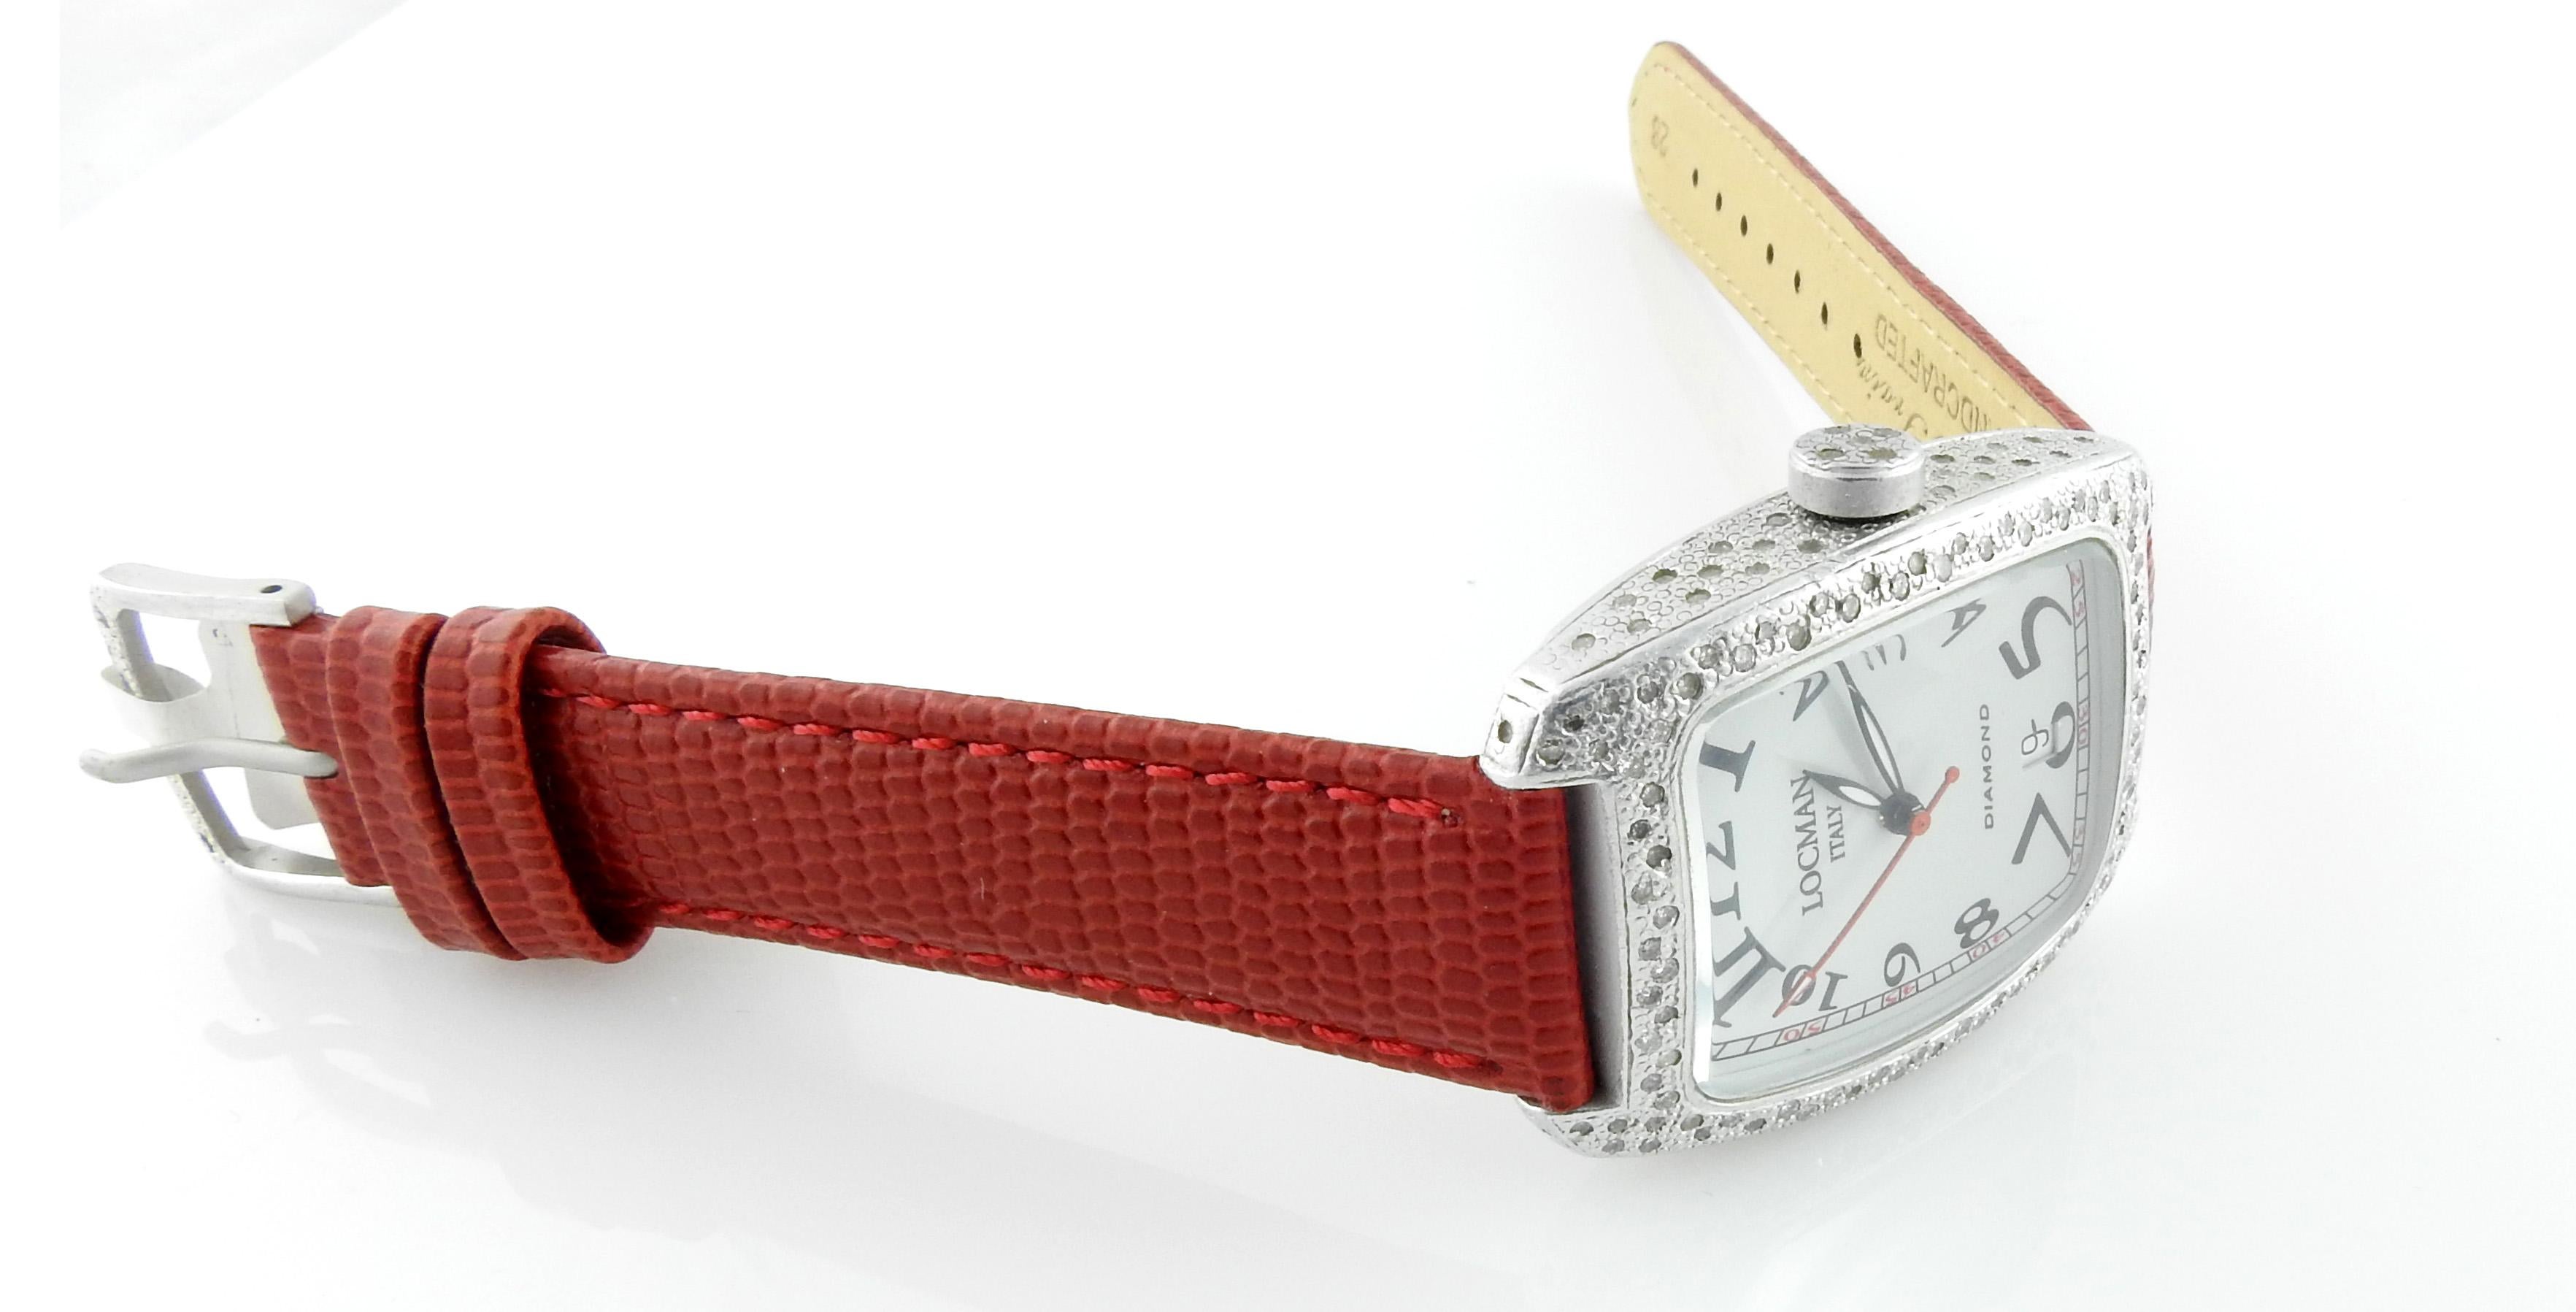 Locman Italy Ladies Diamond Watch

This Locman watch is set in aluminum with a pave diamond bezel and sides.

Quartz movement

32mm wide by 43mm long - case size

Ref. 488

New leather band - not locman - tang buckle is original to watcy

Very good